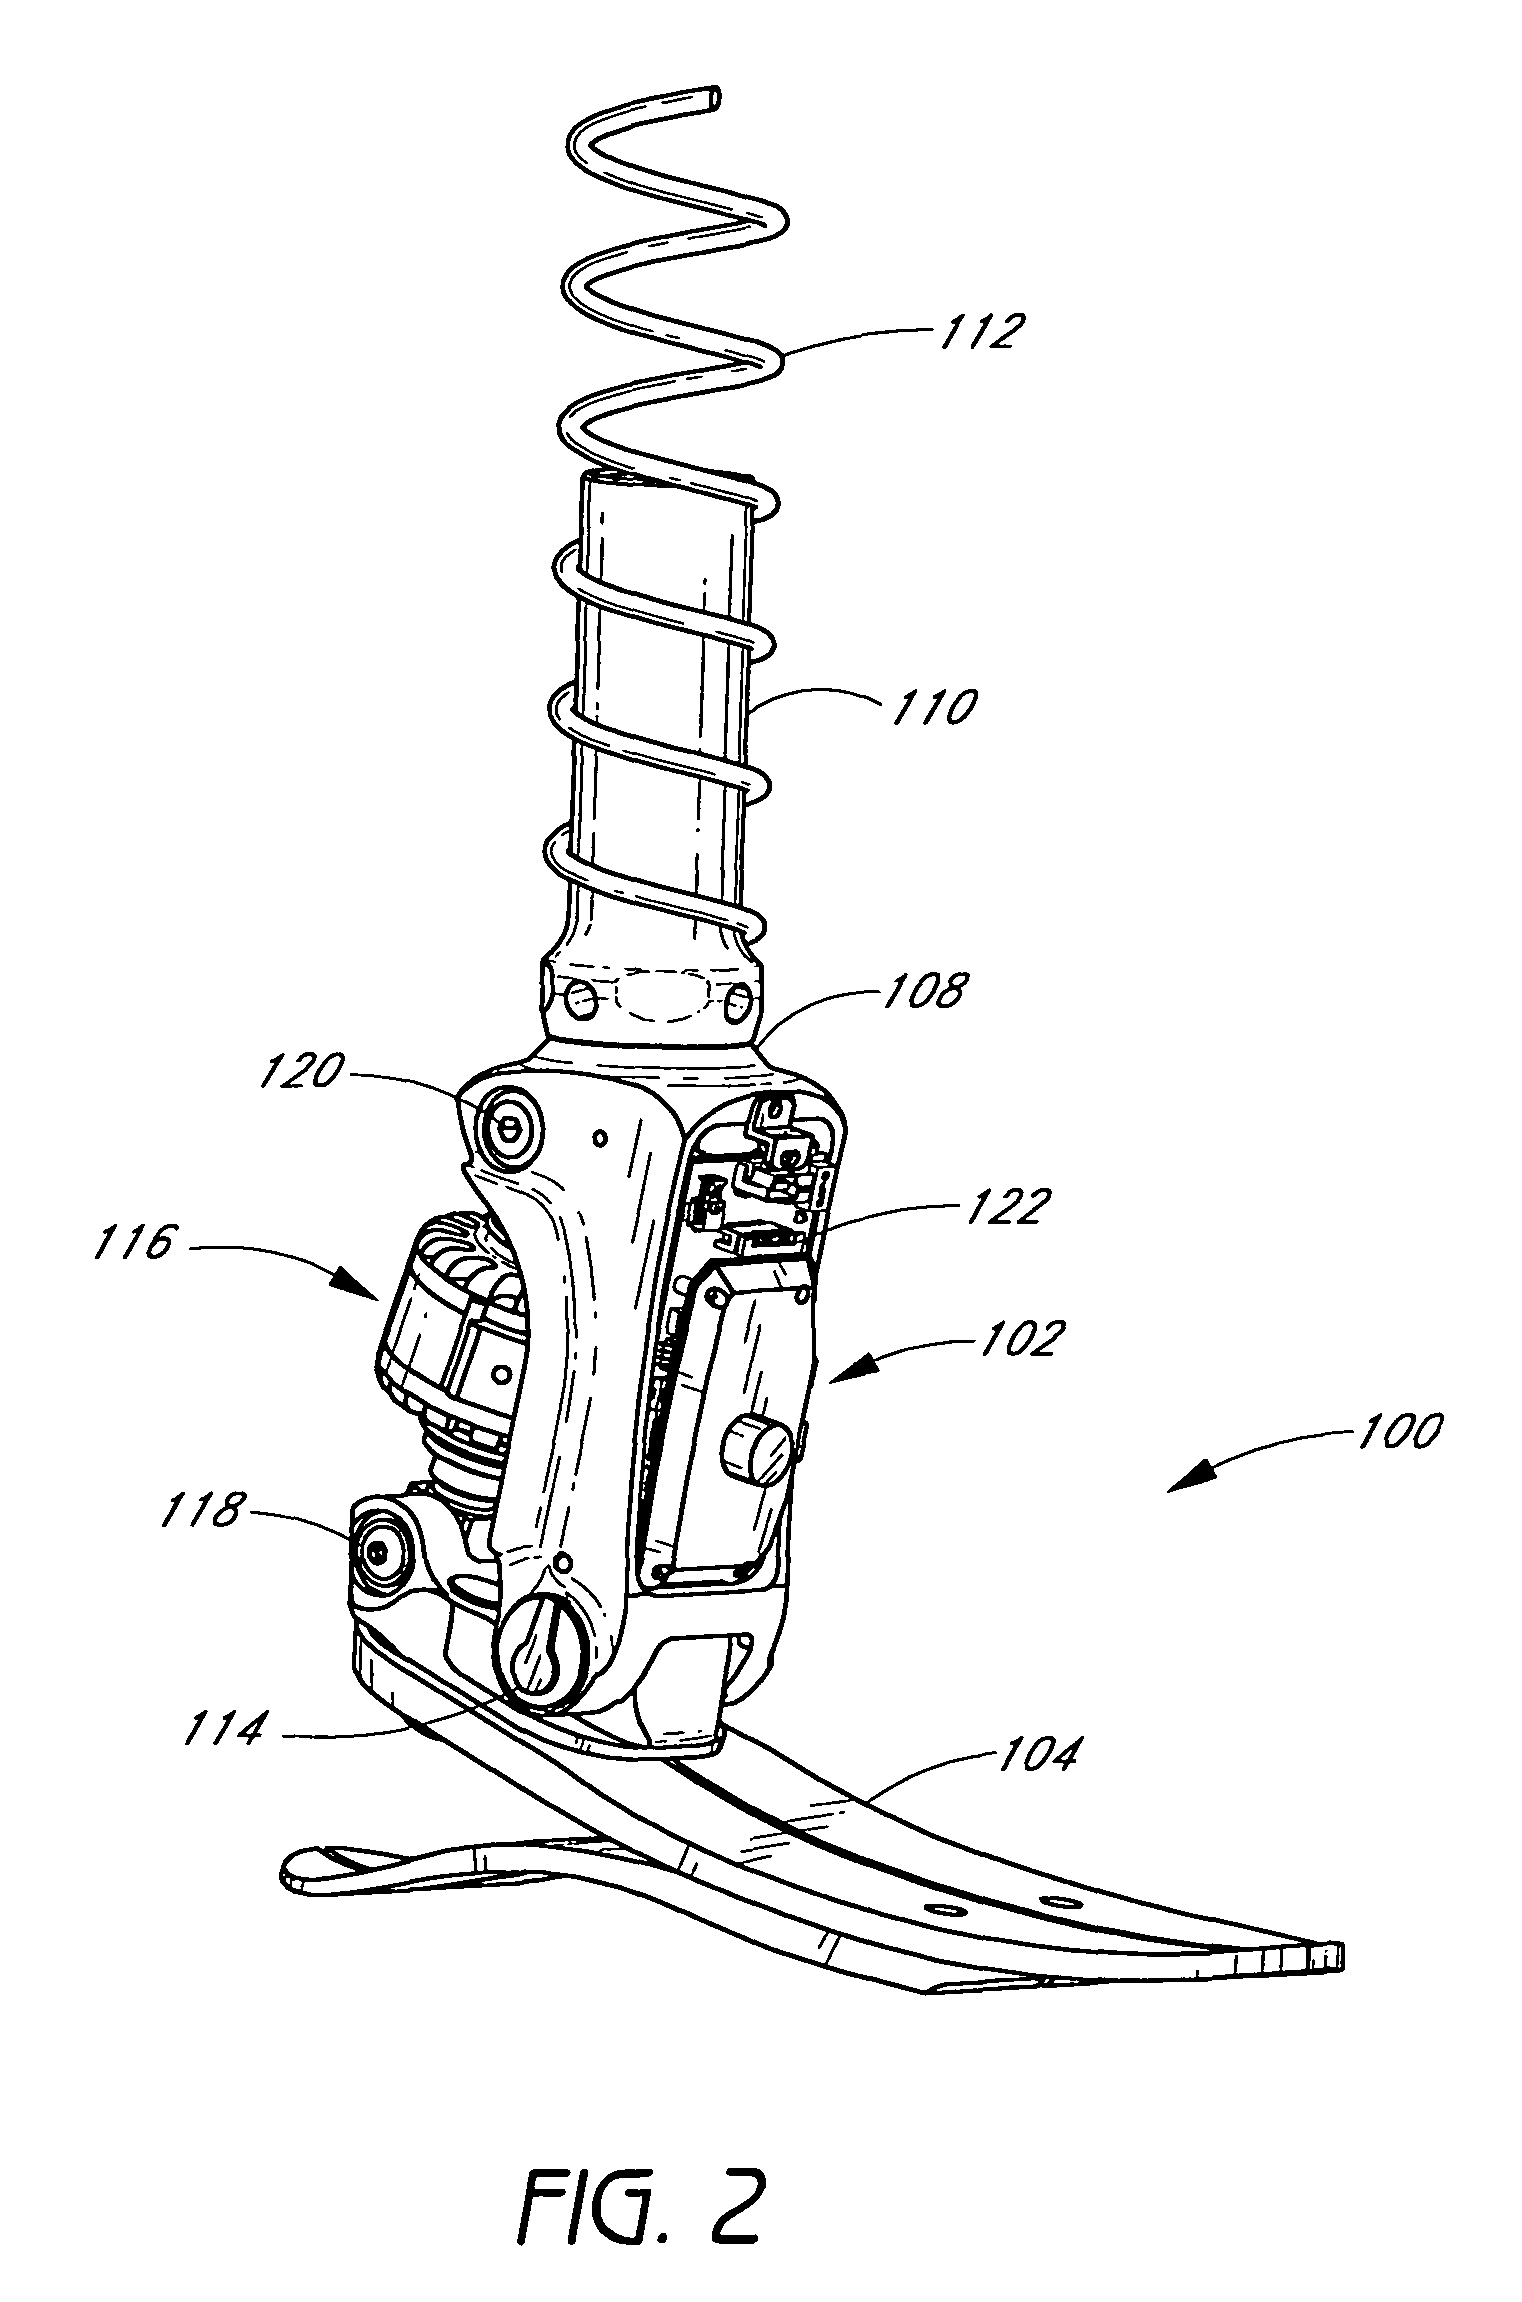 Systems and methods for actuating a prosthetic ankle based on a relaxed position